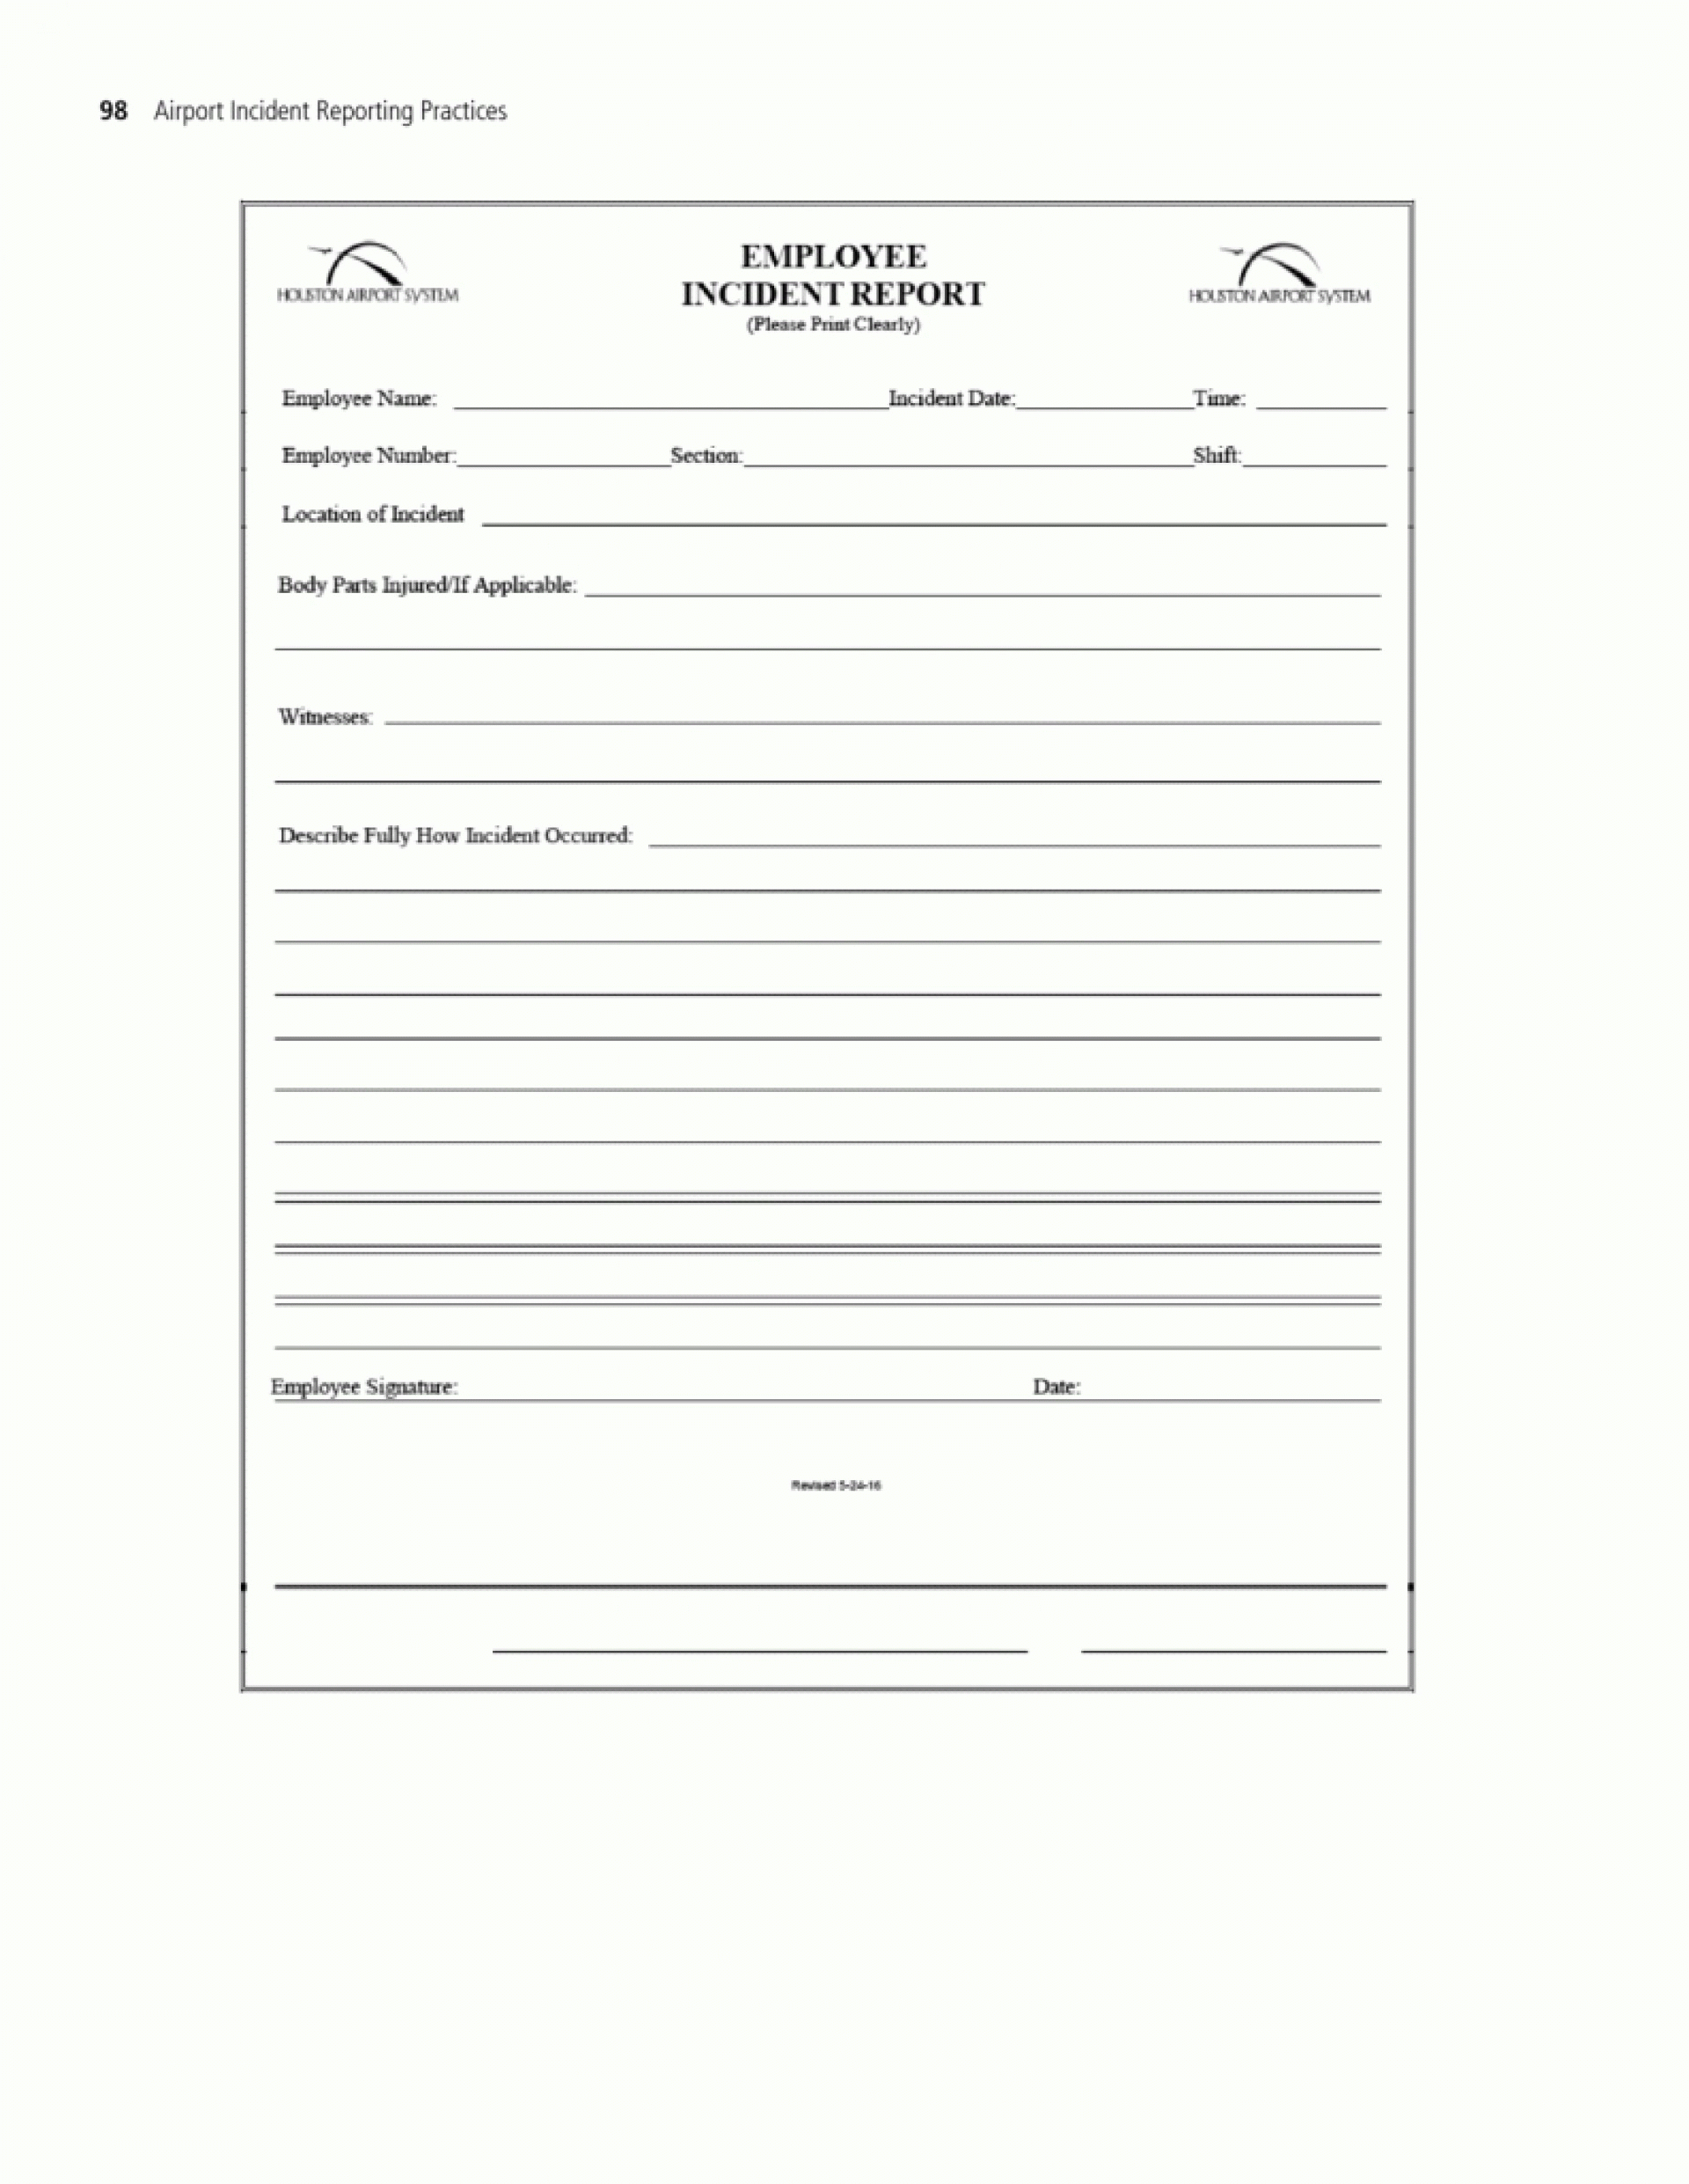 024 Wholesale Application Form 788X1114 Template Ideas New With Incident Report Form Template Qld